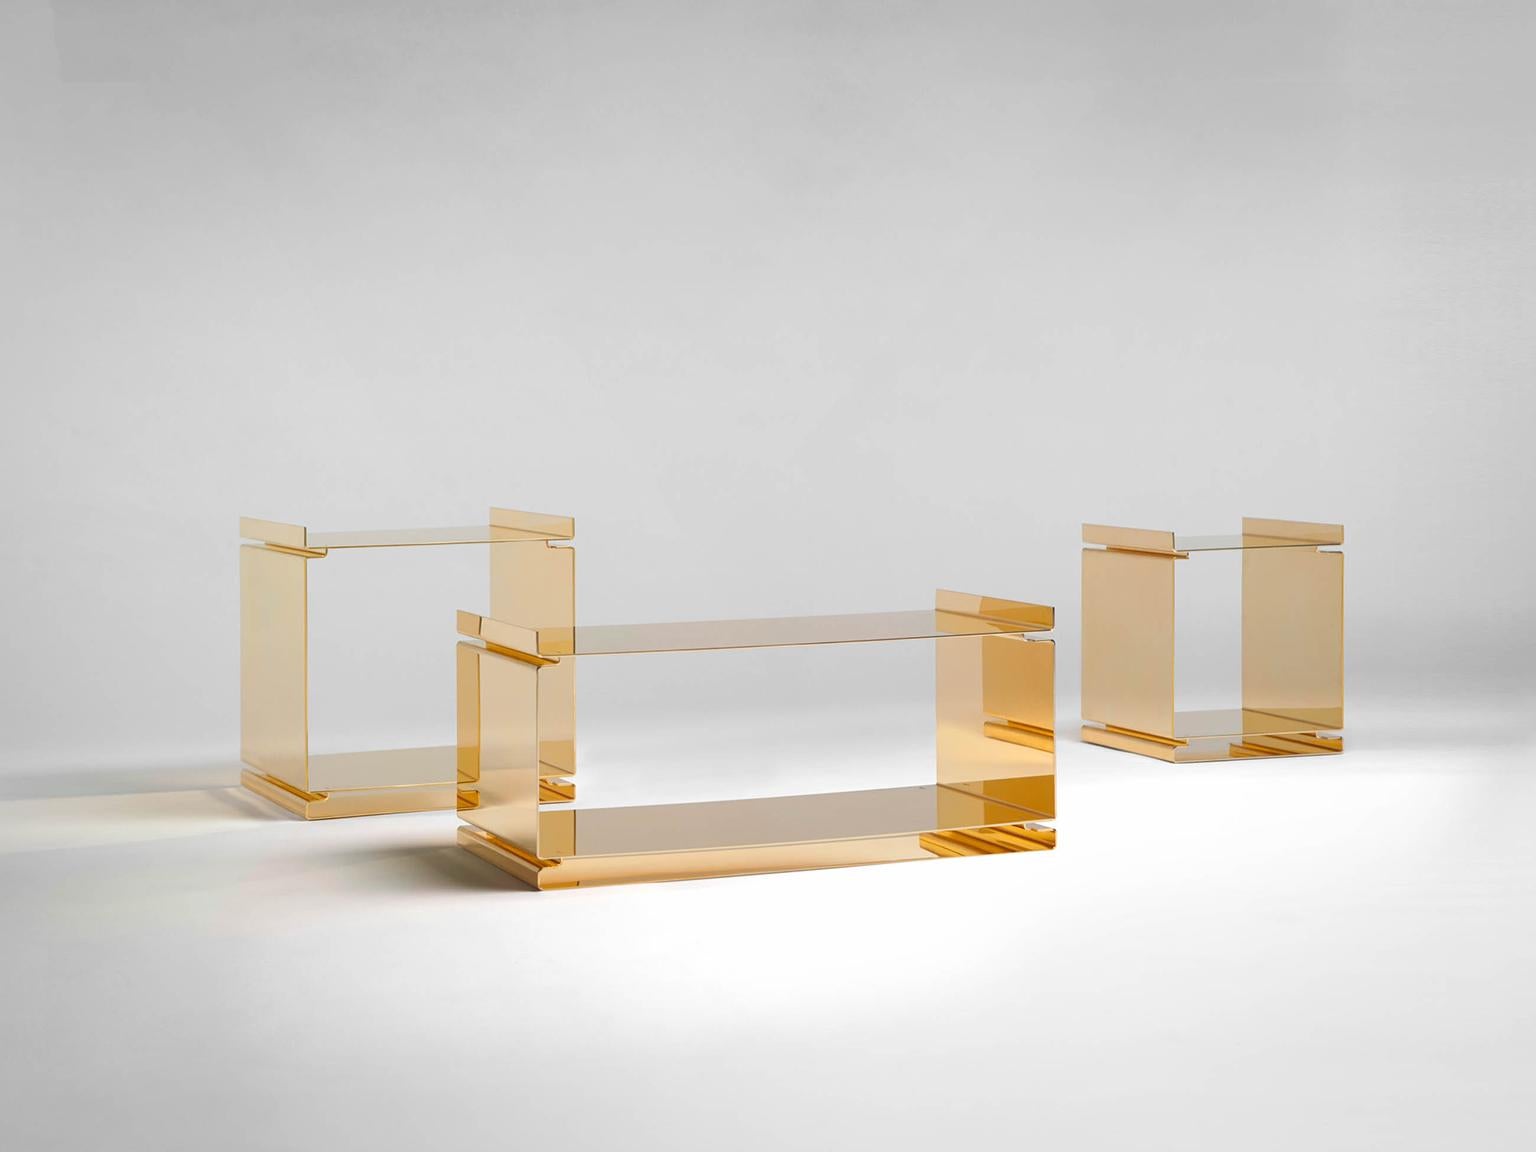 SEM Gold collection, low tables of interlocking steel elements. Plated in 24-karat polished yellow gold. Set of three: W 30 x D 30 x H 35, W 40 x D 40 x H 40, W 70 x D 35 x H 30 cm. The Gold collection has a range of exemplary pieces that echo the